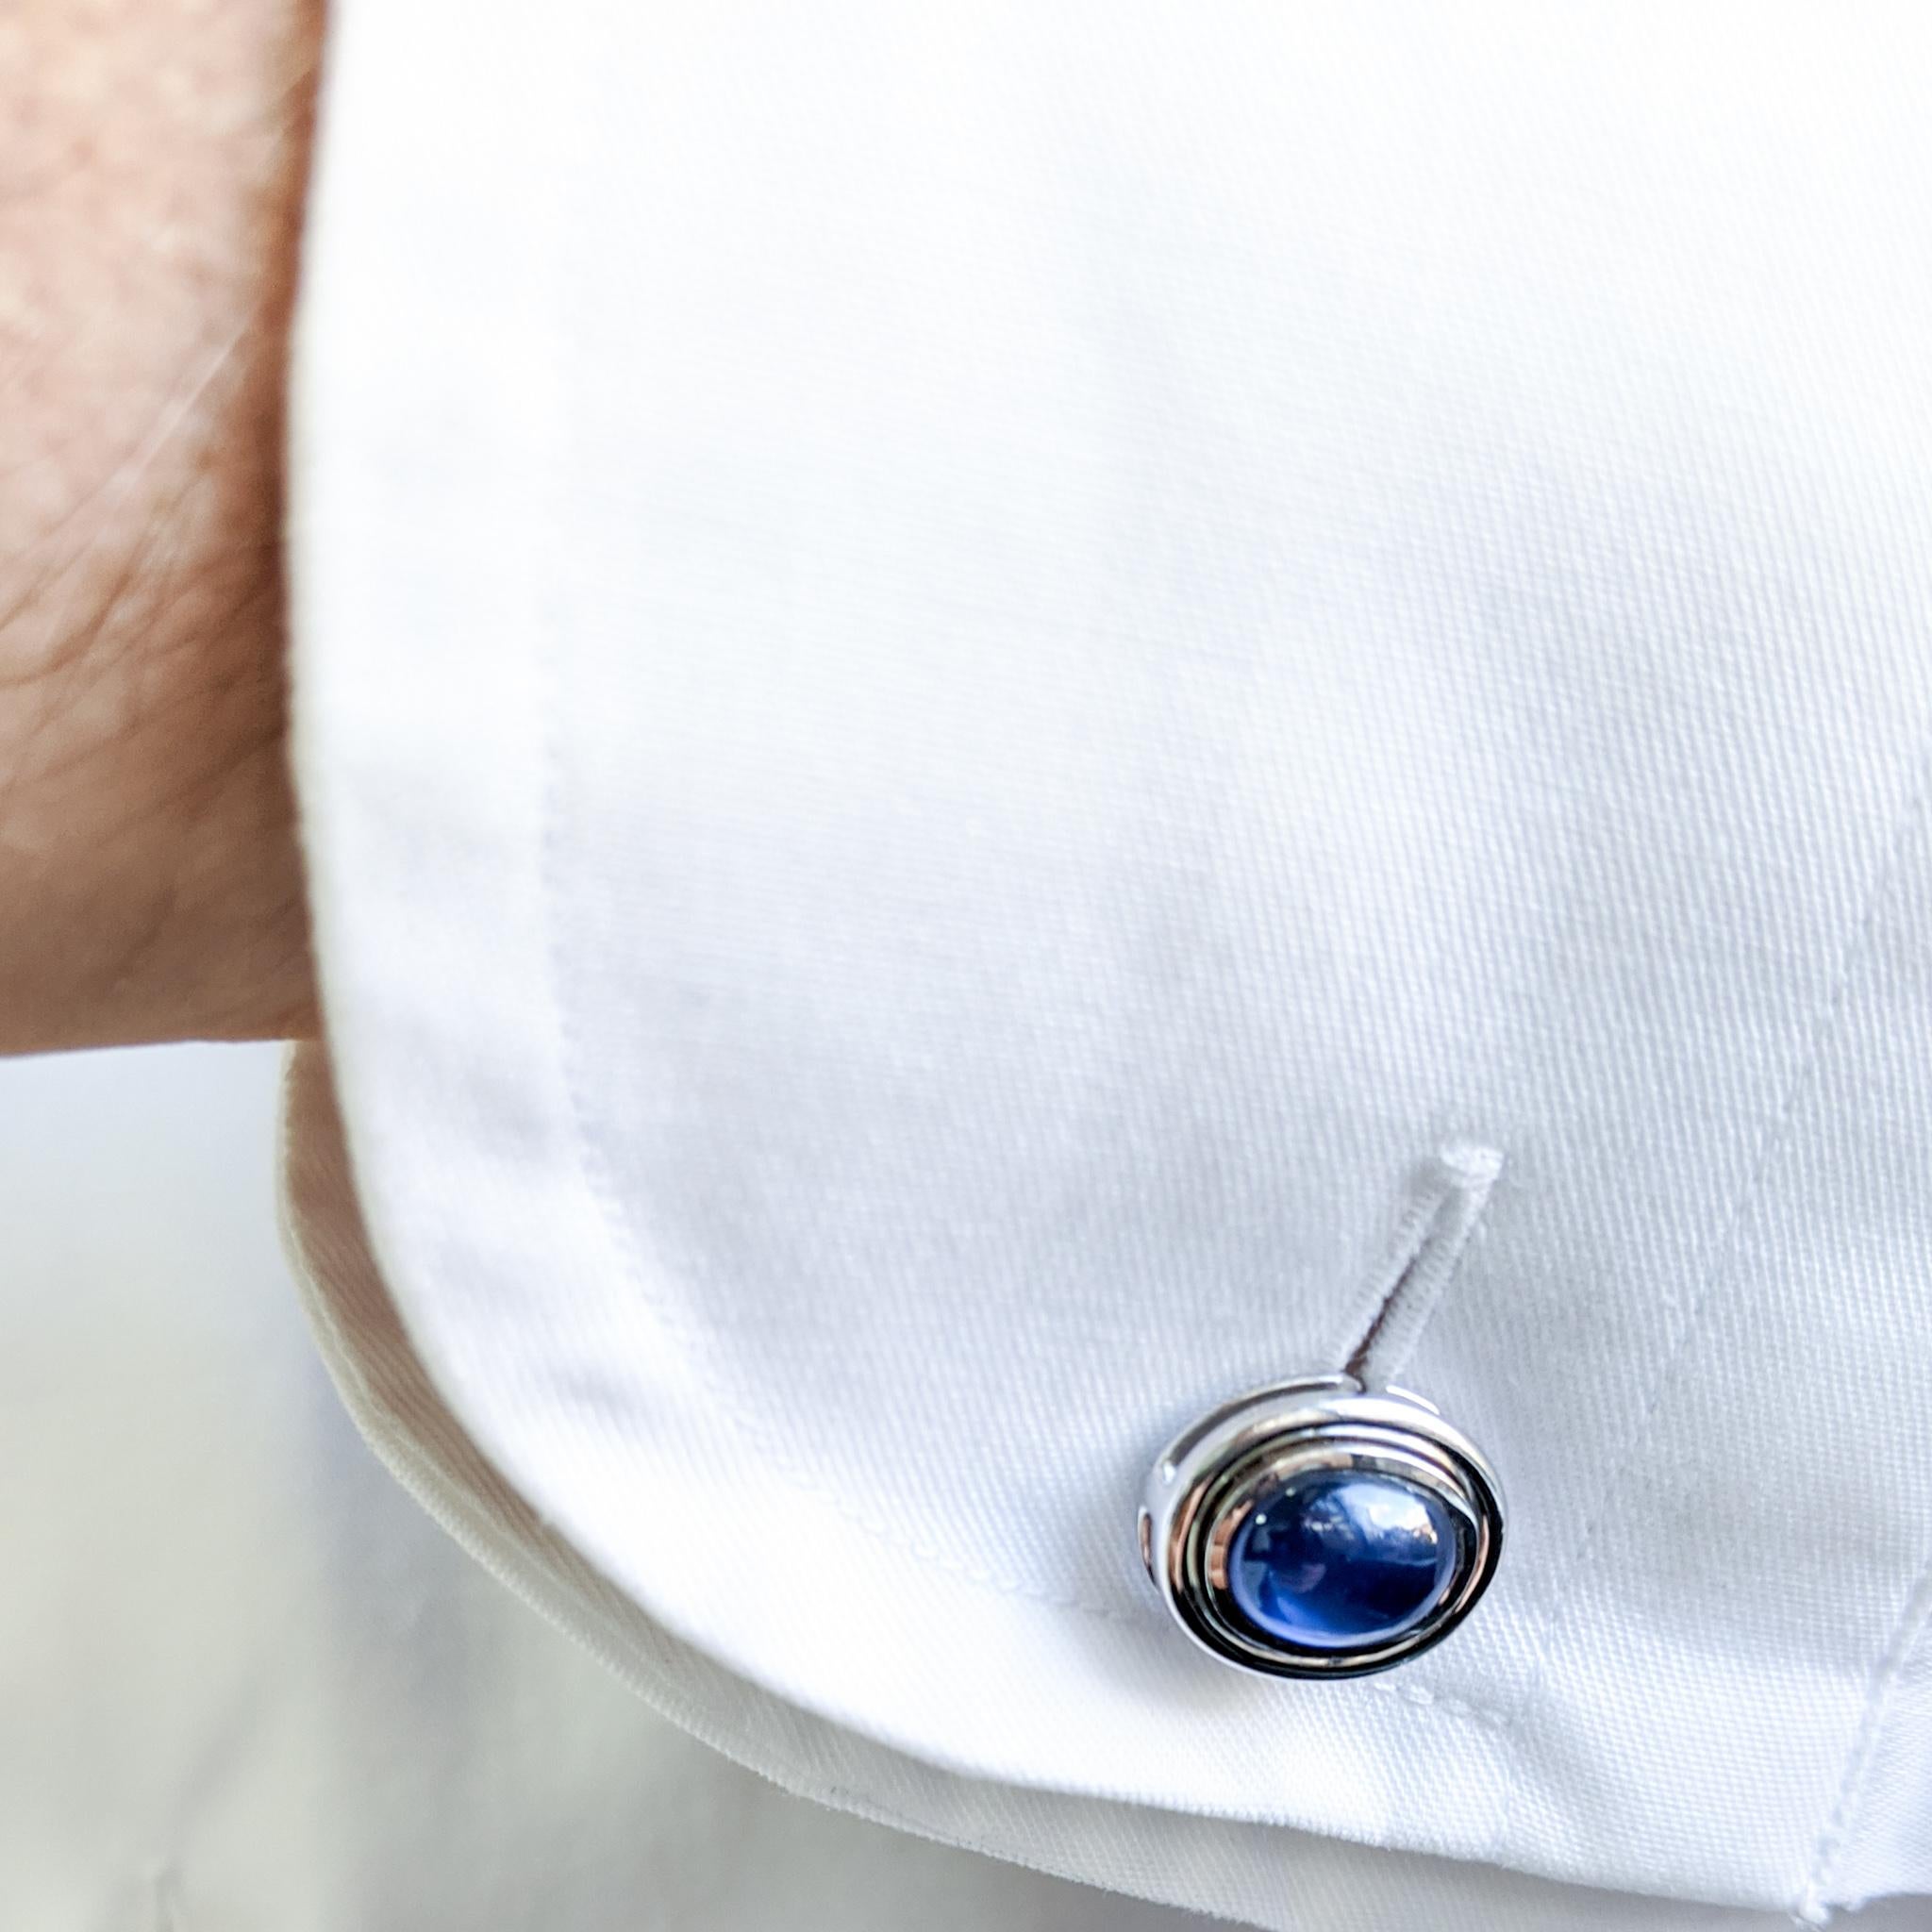 The epitome of subtle elegance, these cabochon gemstone cufflinks are the perfect everyday piece for any occasion --from days at the office to dinner parties and black tie events. And of course the perfect Holiday Gift. 

Brilliant cabochon